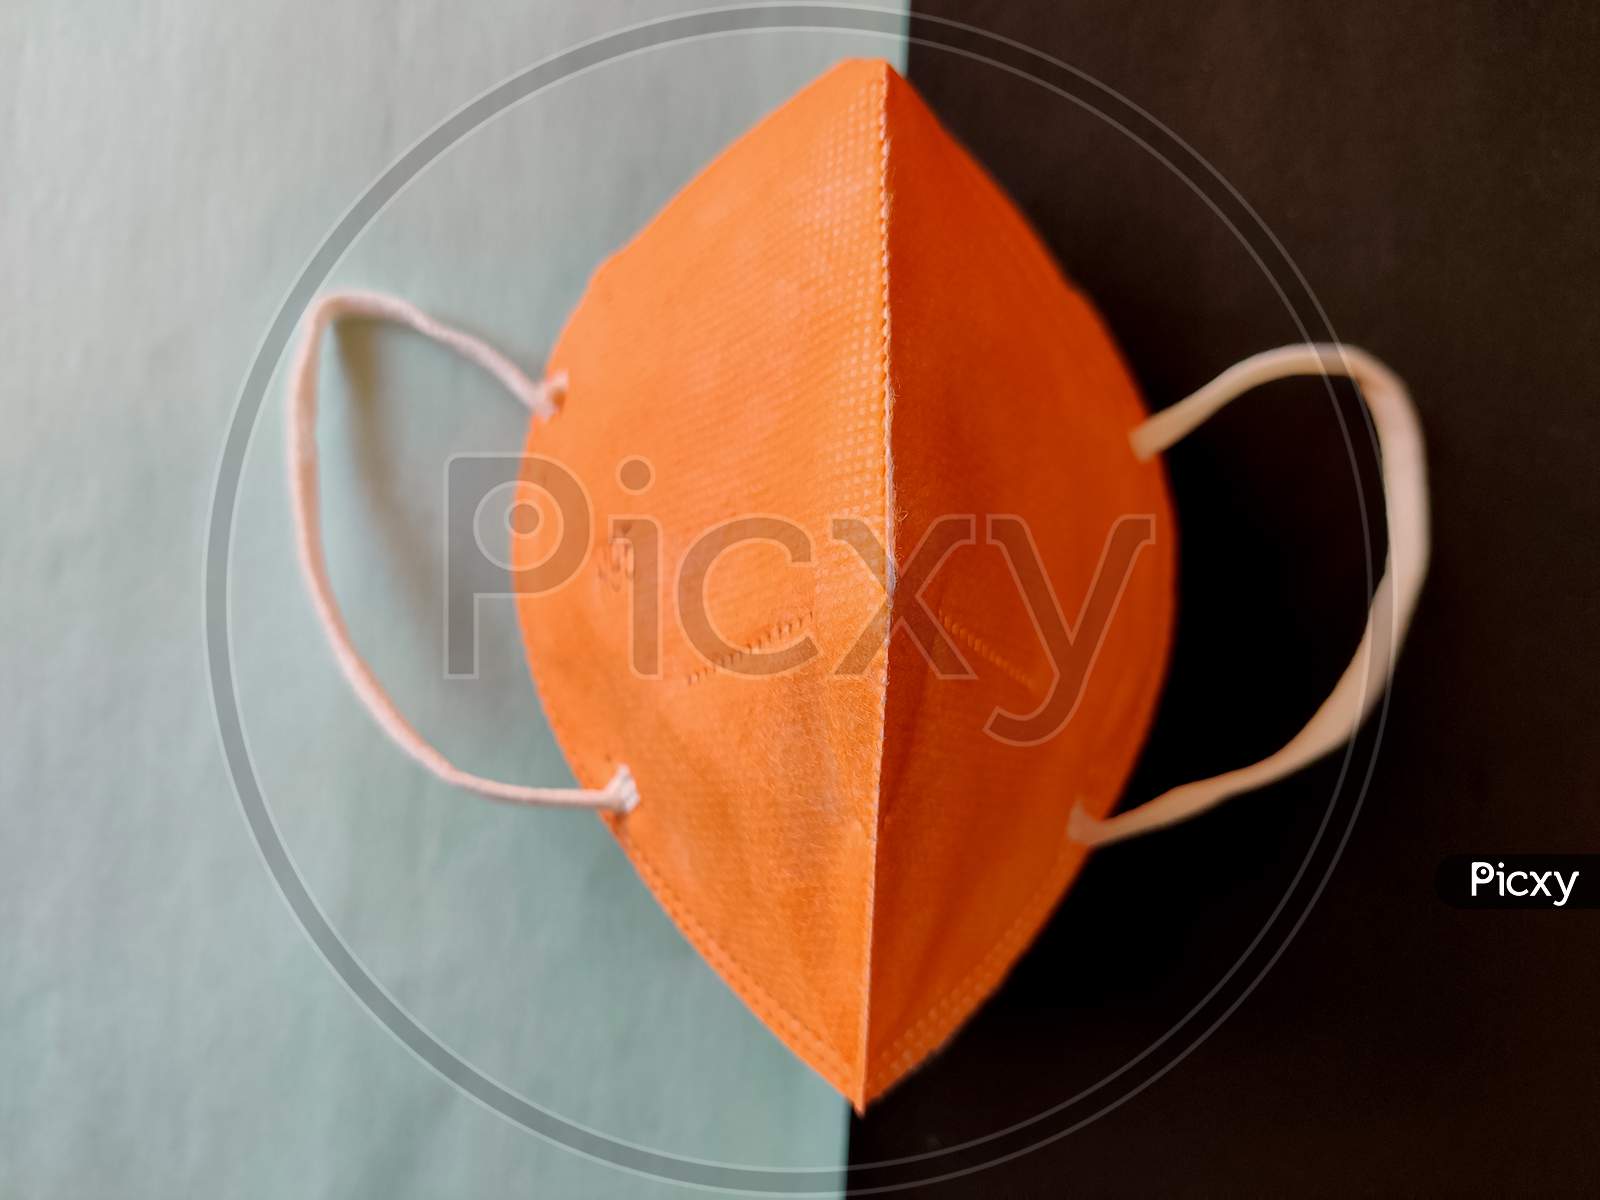 One Orange Color Kn-95 Face Mask Without Filter Cap Isolated On Black And Green Background. Protection From Coronavirus Or Covid-19. Wear A Mask. Coronavirus Pandemic. Top View